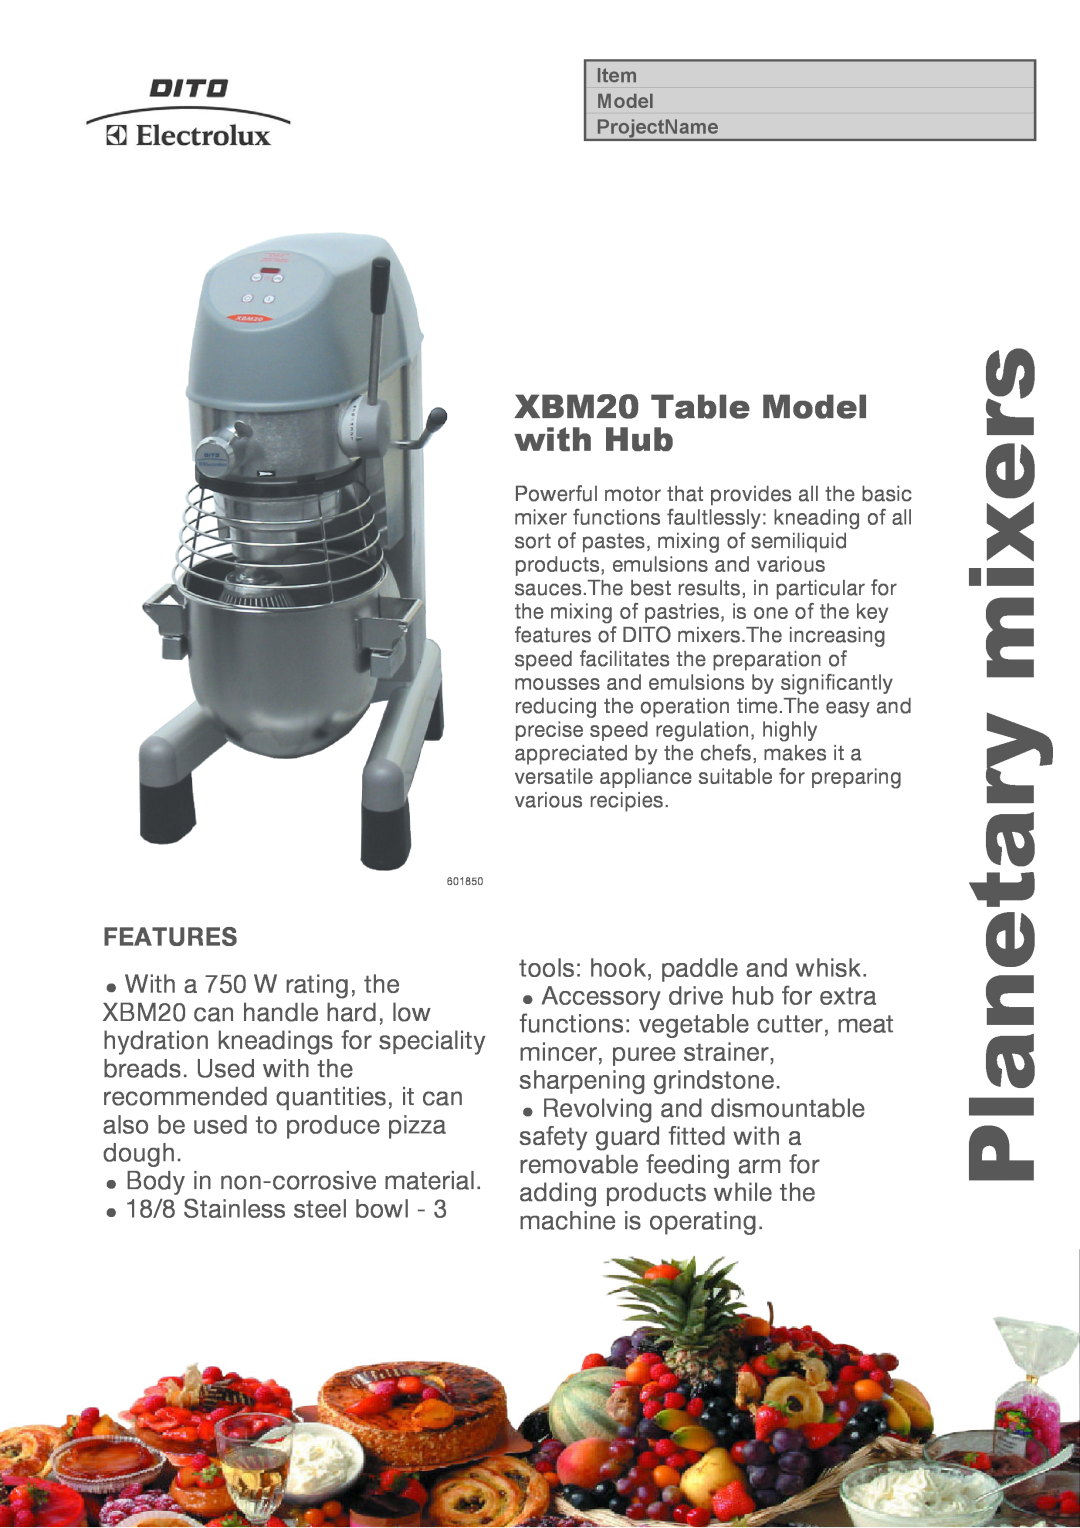 Electrolux XBMF20AST6, XBMF20AST5, XBMF20AT36, XBMF20AT35 manual Features, mixers, Planetary, XBM20 Table Model with Hub 